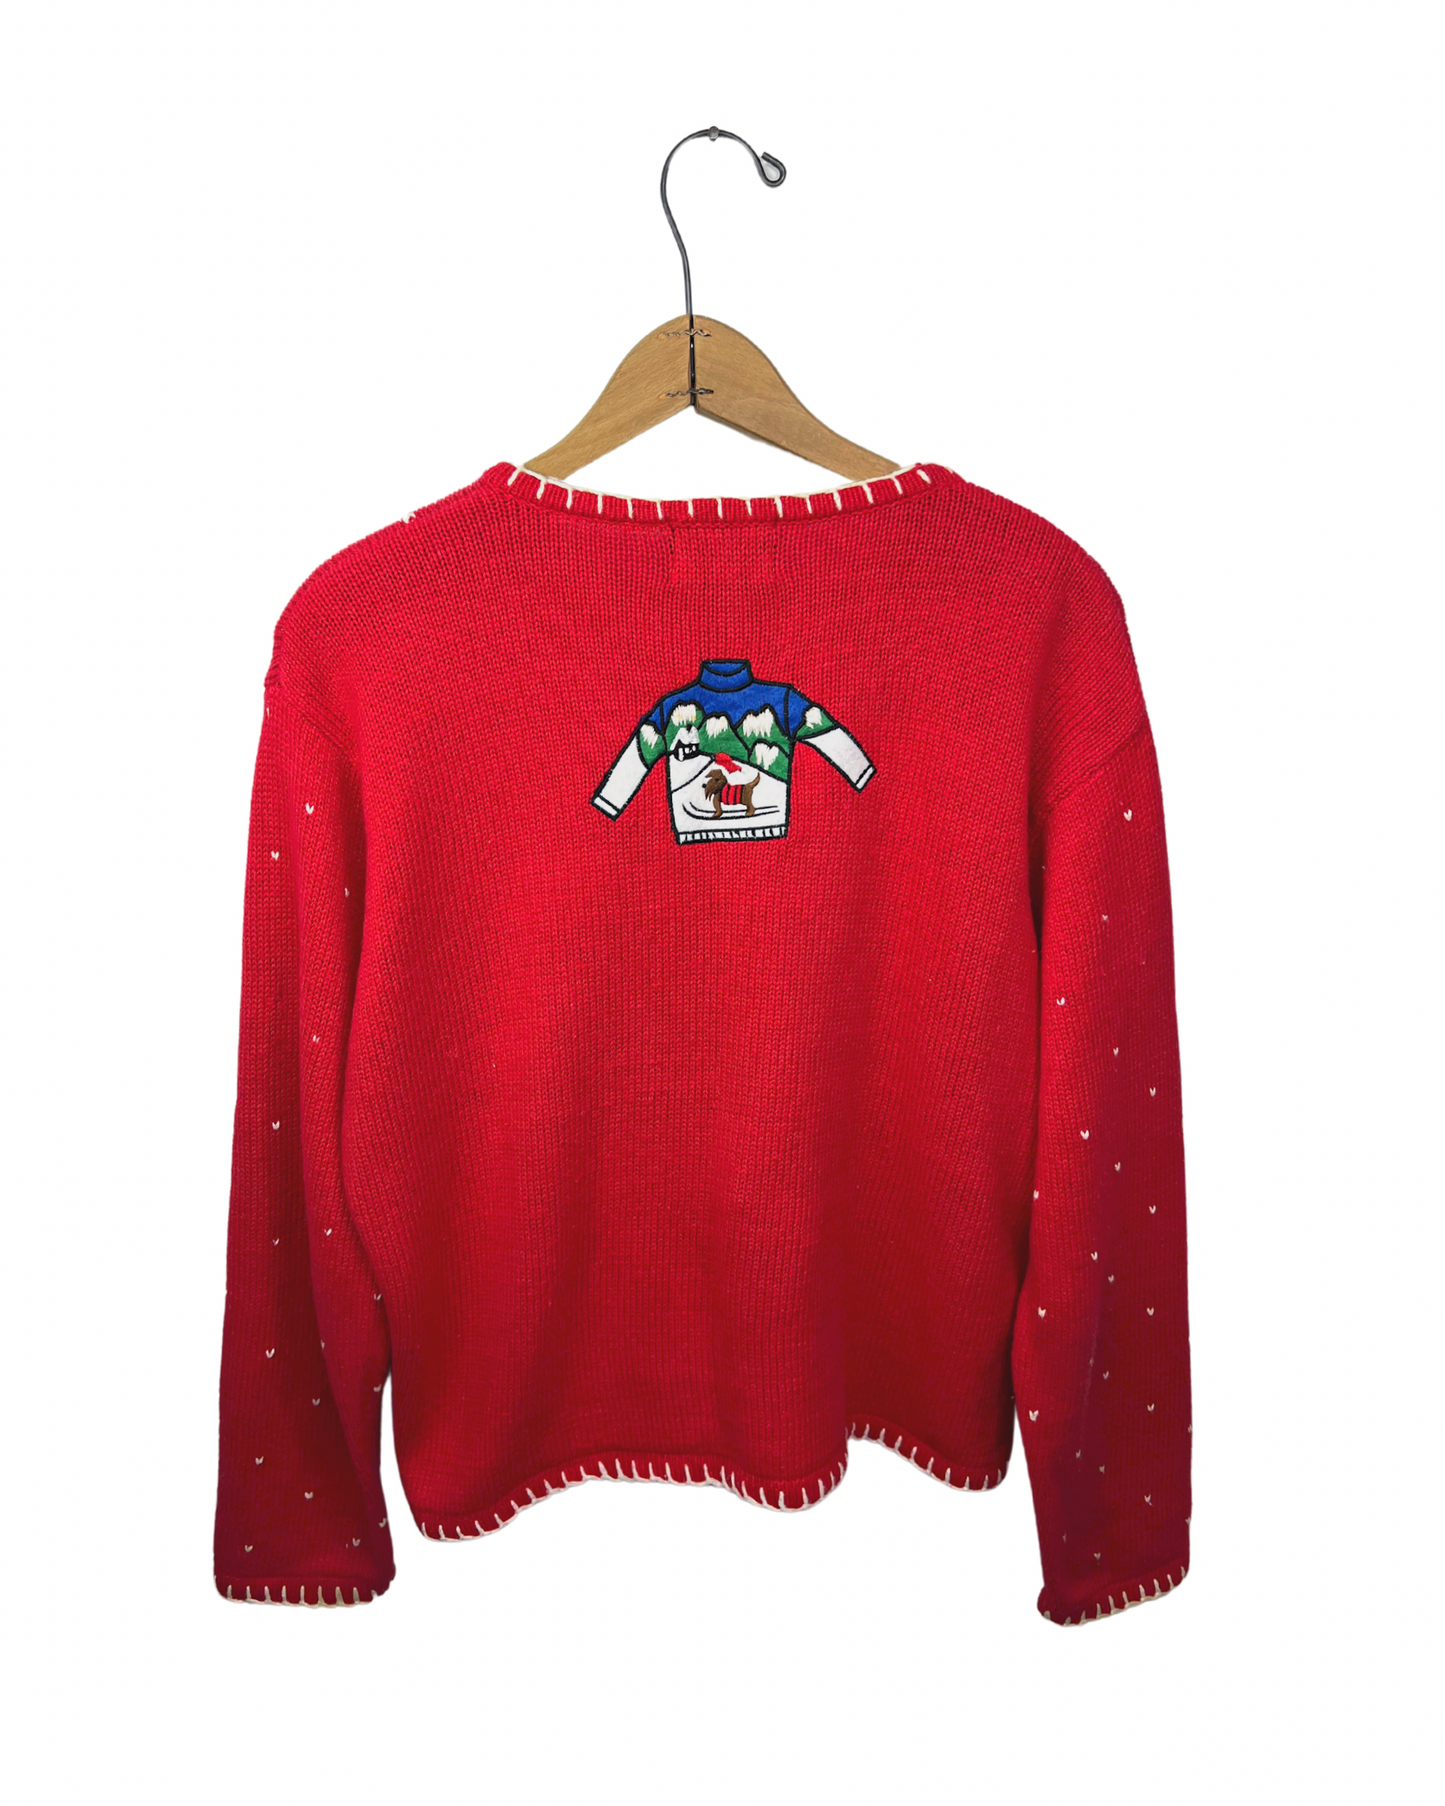 90’s Adorable Holiday Clothesline Chunky Cardigan Sweater